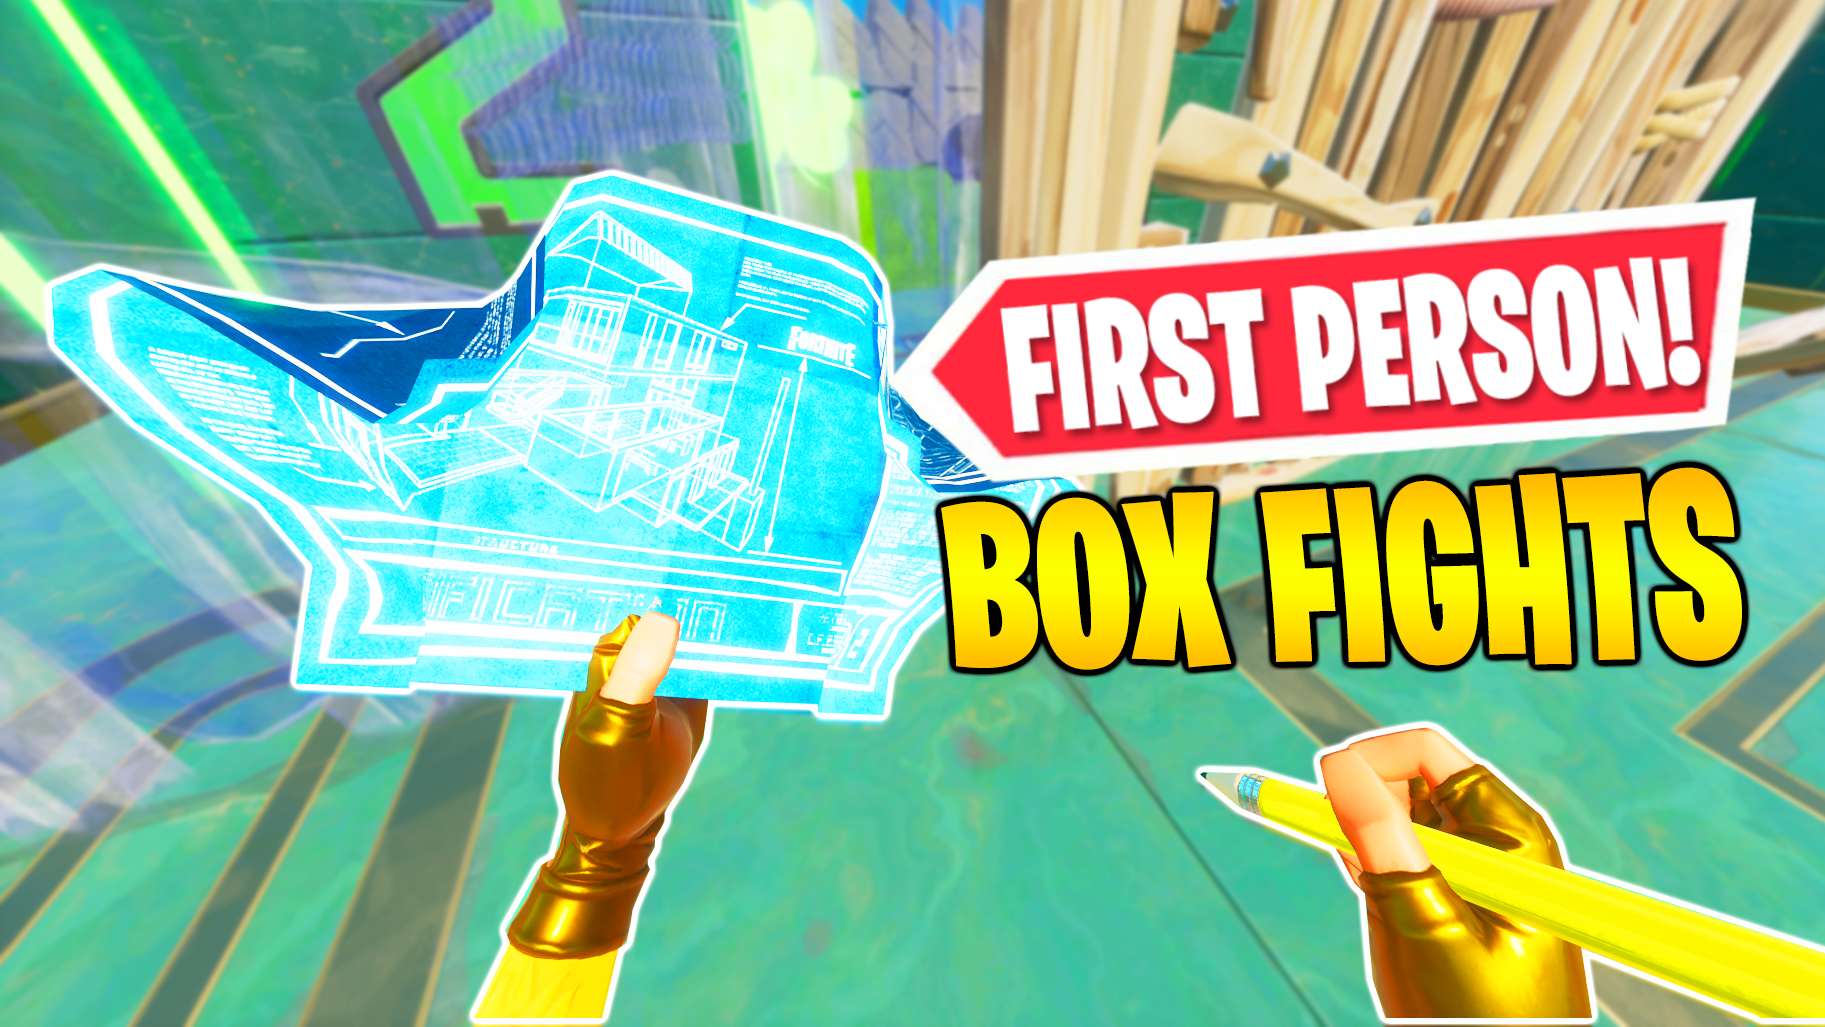 free for all box fight code